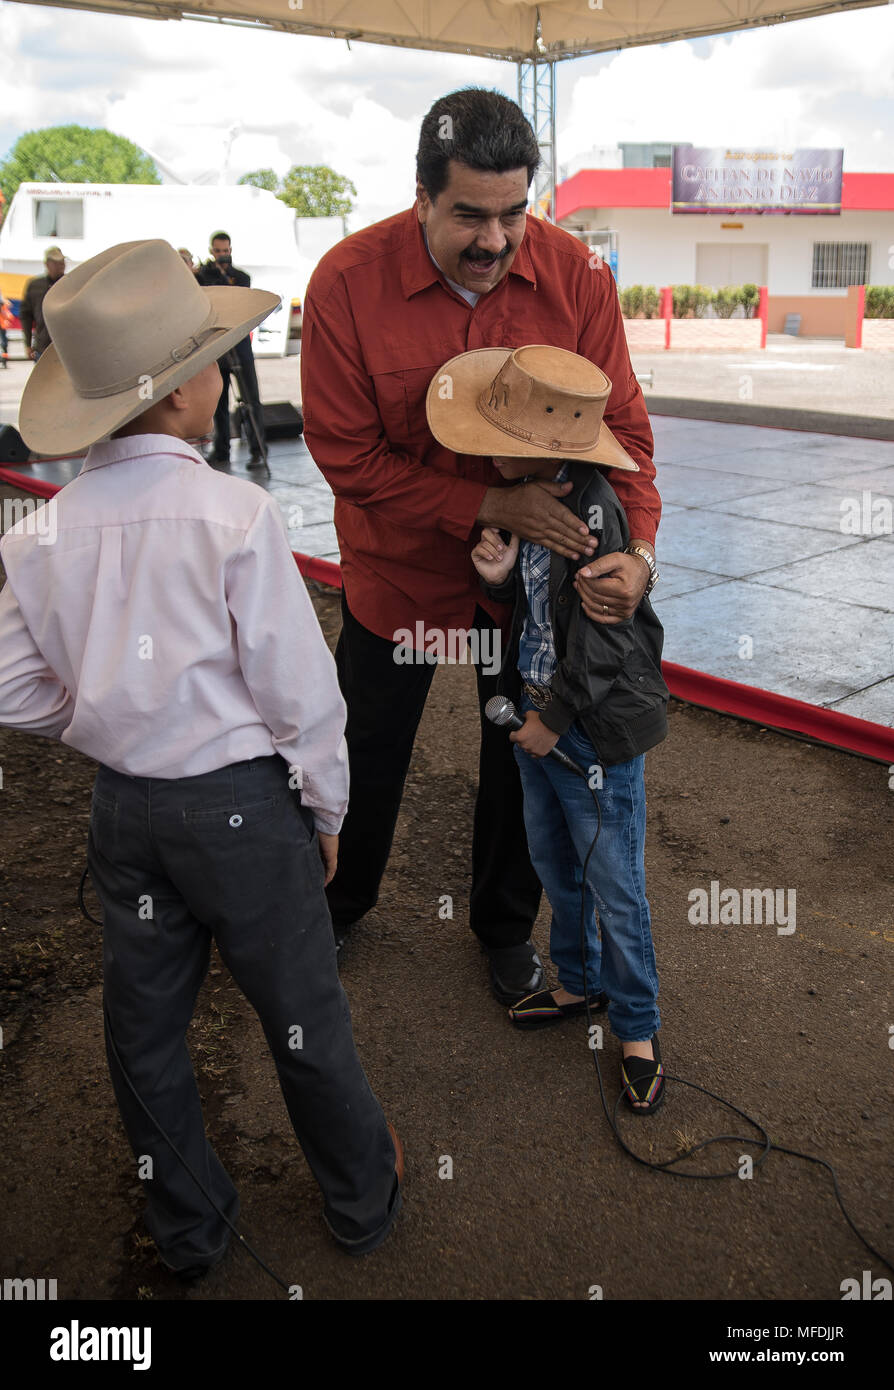 Venezuela, Tucupita. 24th april 2018. The president of Venezuela, Nicolás Maduro, arrives at the airport in the city of Tucupita, capital of the state of Delta Amacuro (east), to participate in a campaign event. Marcos Salgado / Alamy News Stock Photo